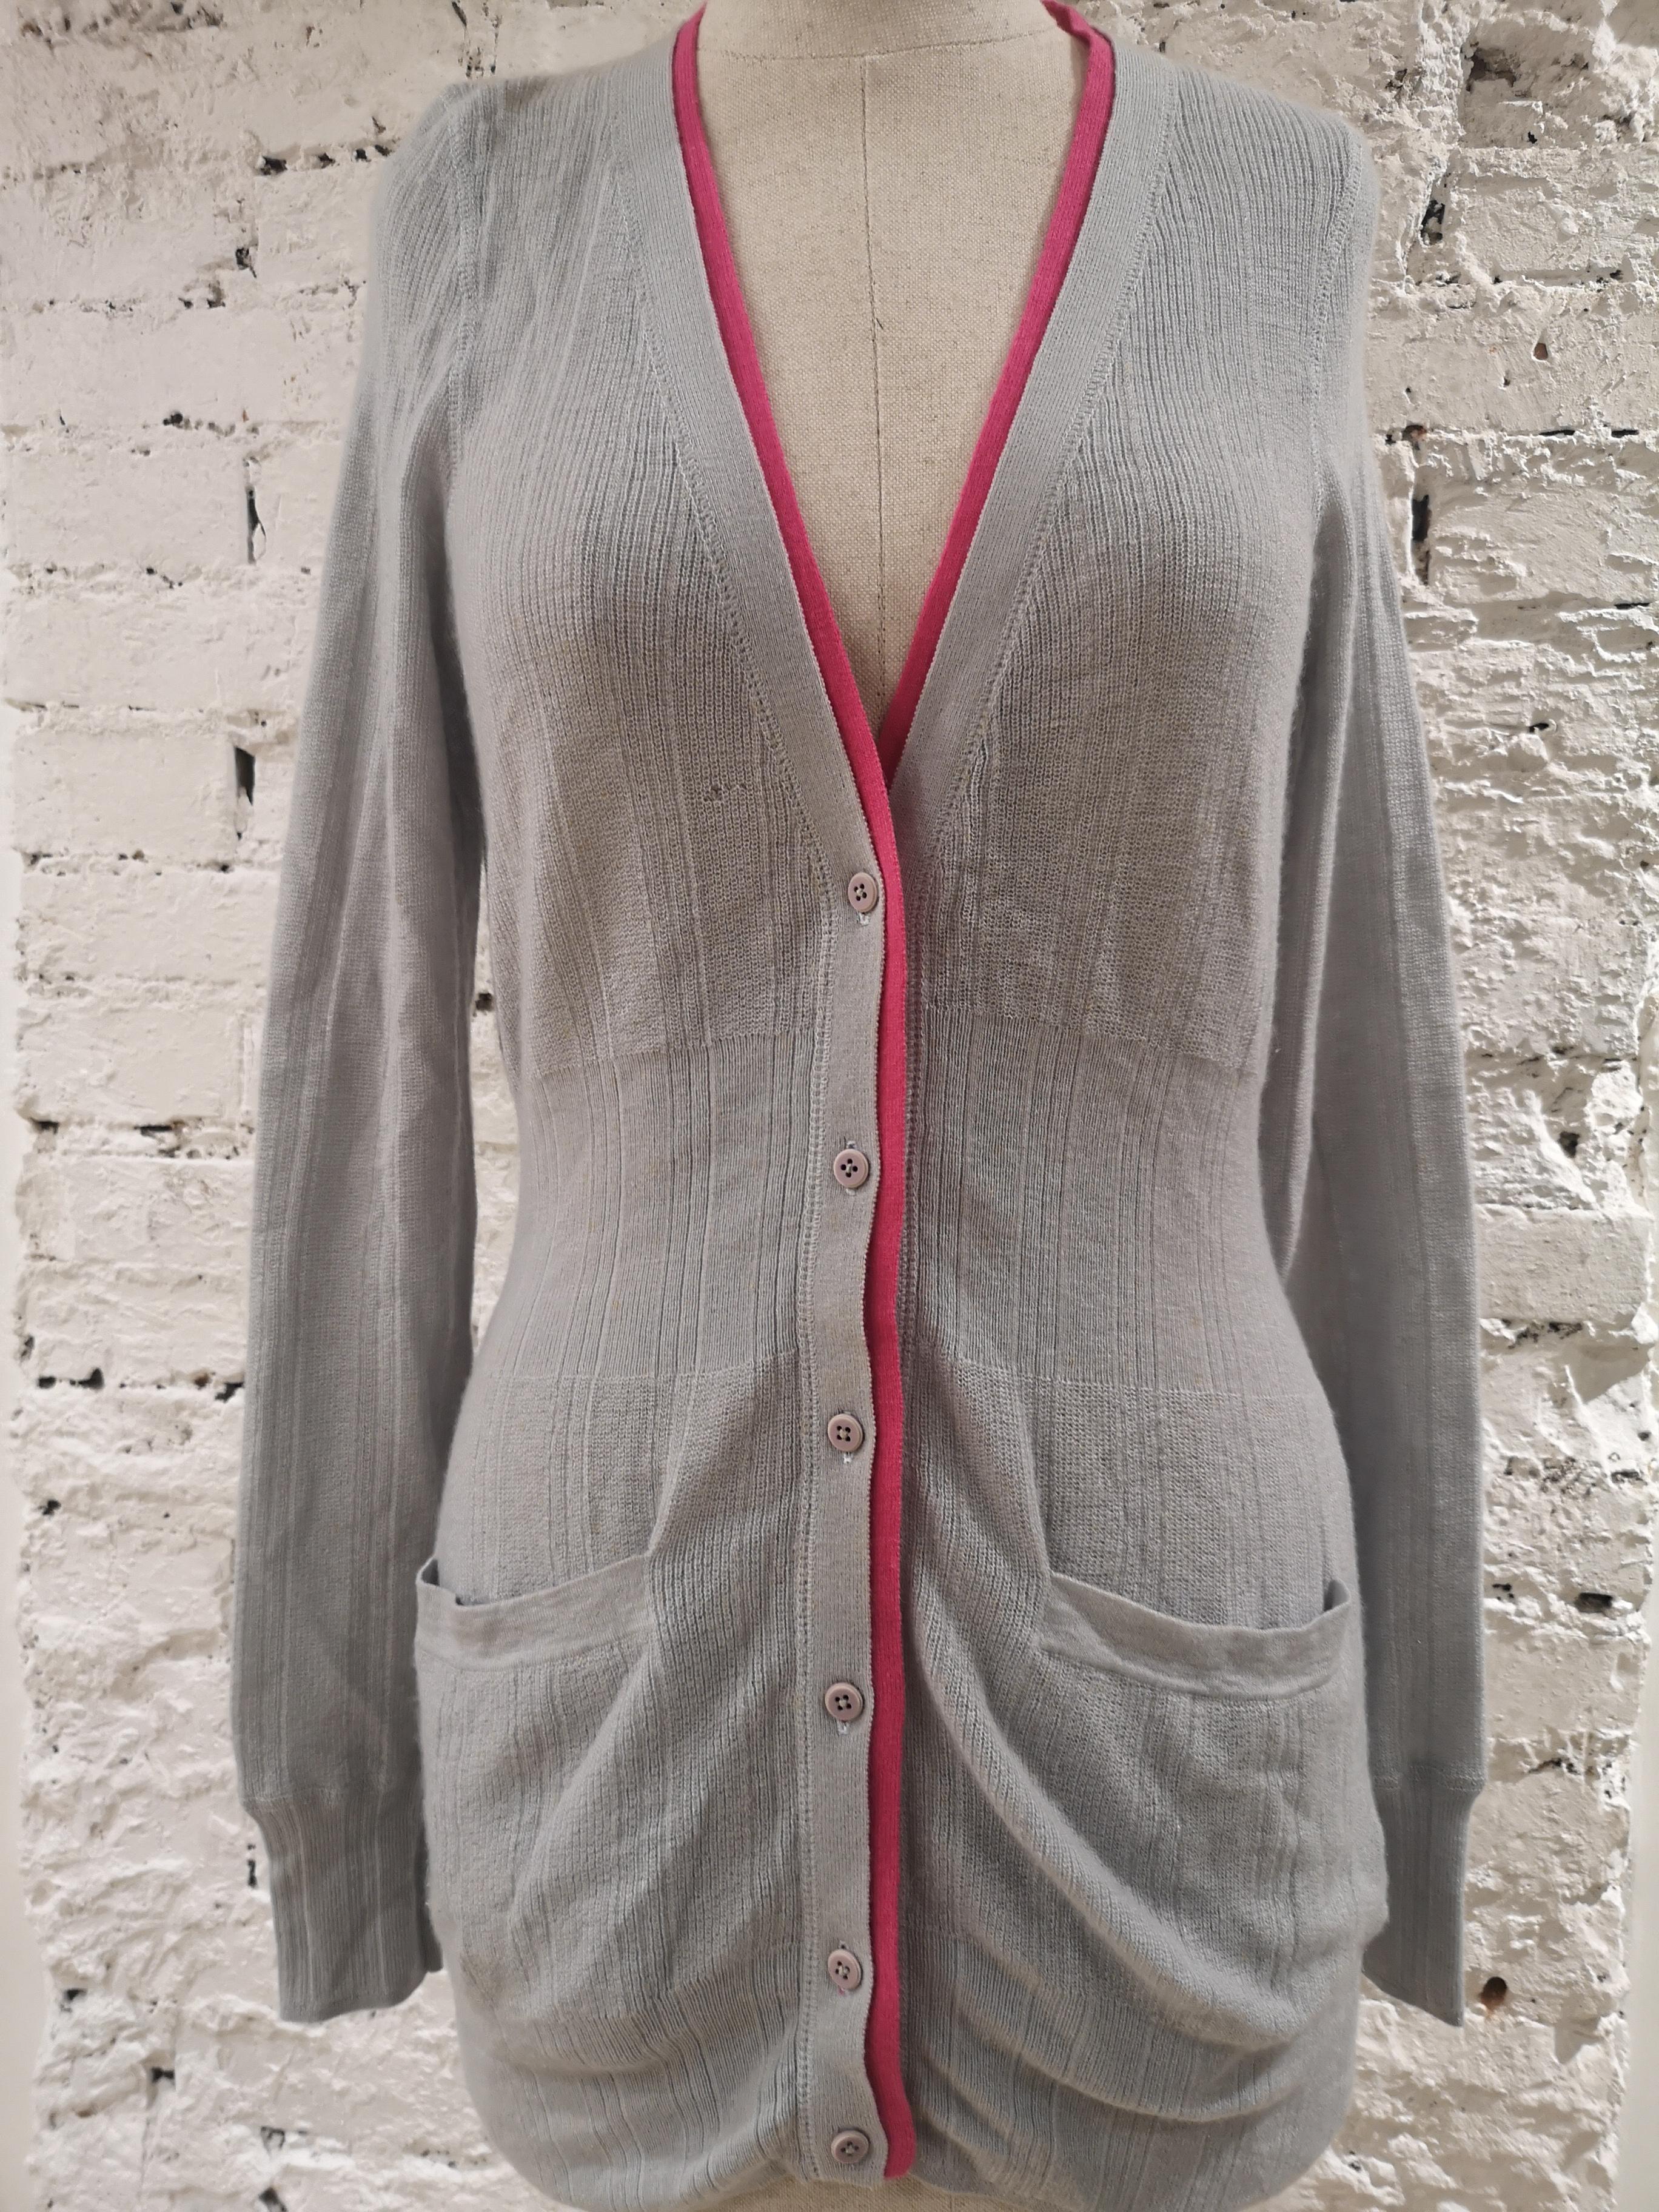 Marc by Marc Jacobs grey cachemire cardigan sweater
Size M